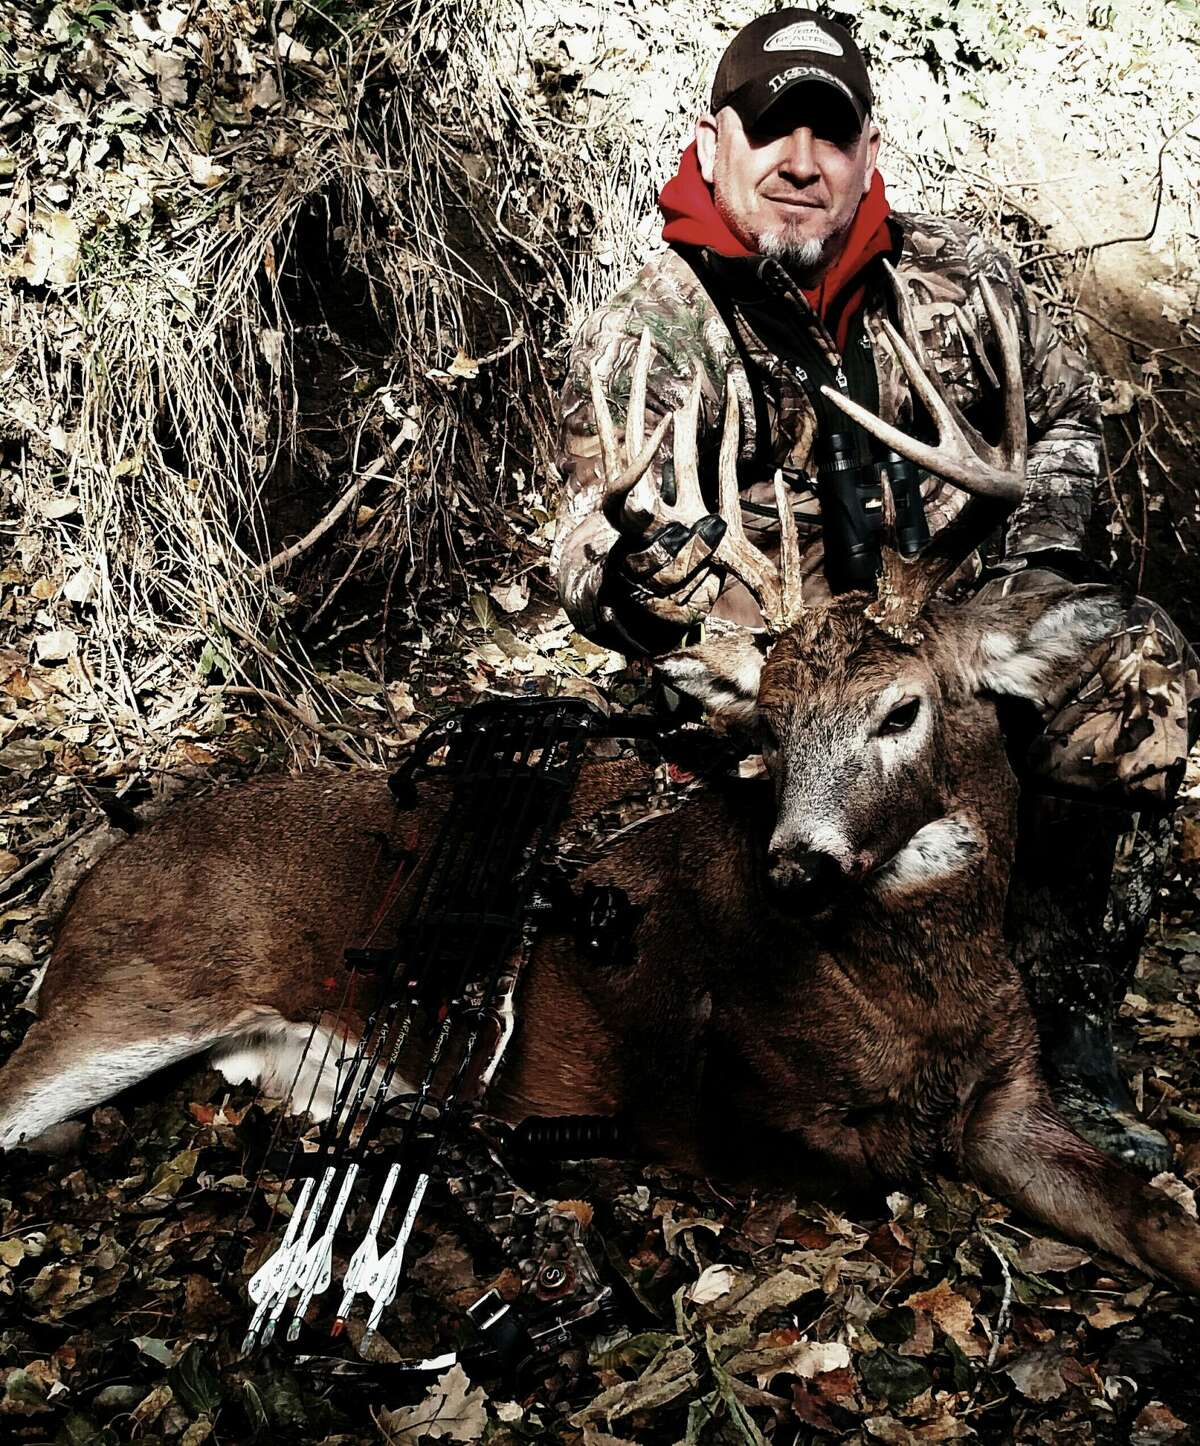 Brent Clark of Sanford is shown with a deer harvested in a past year.